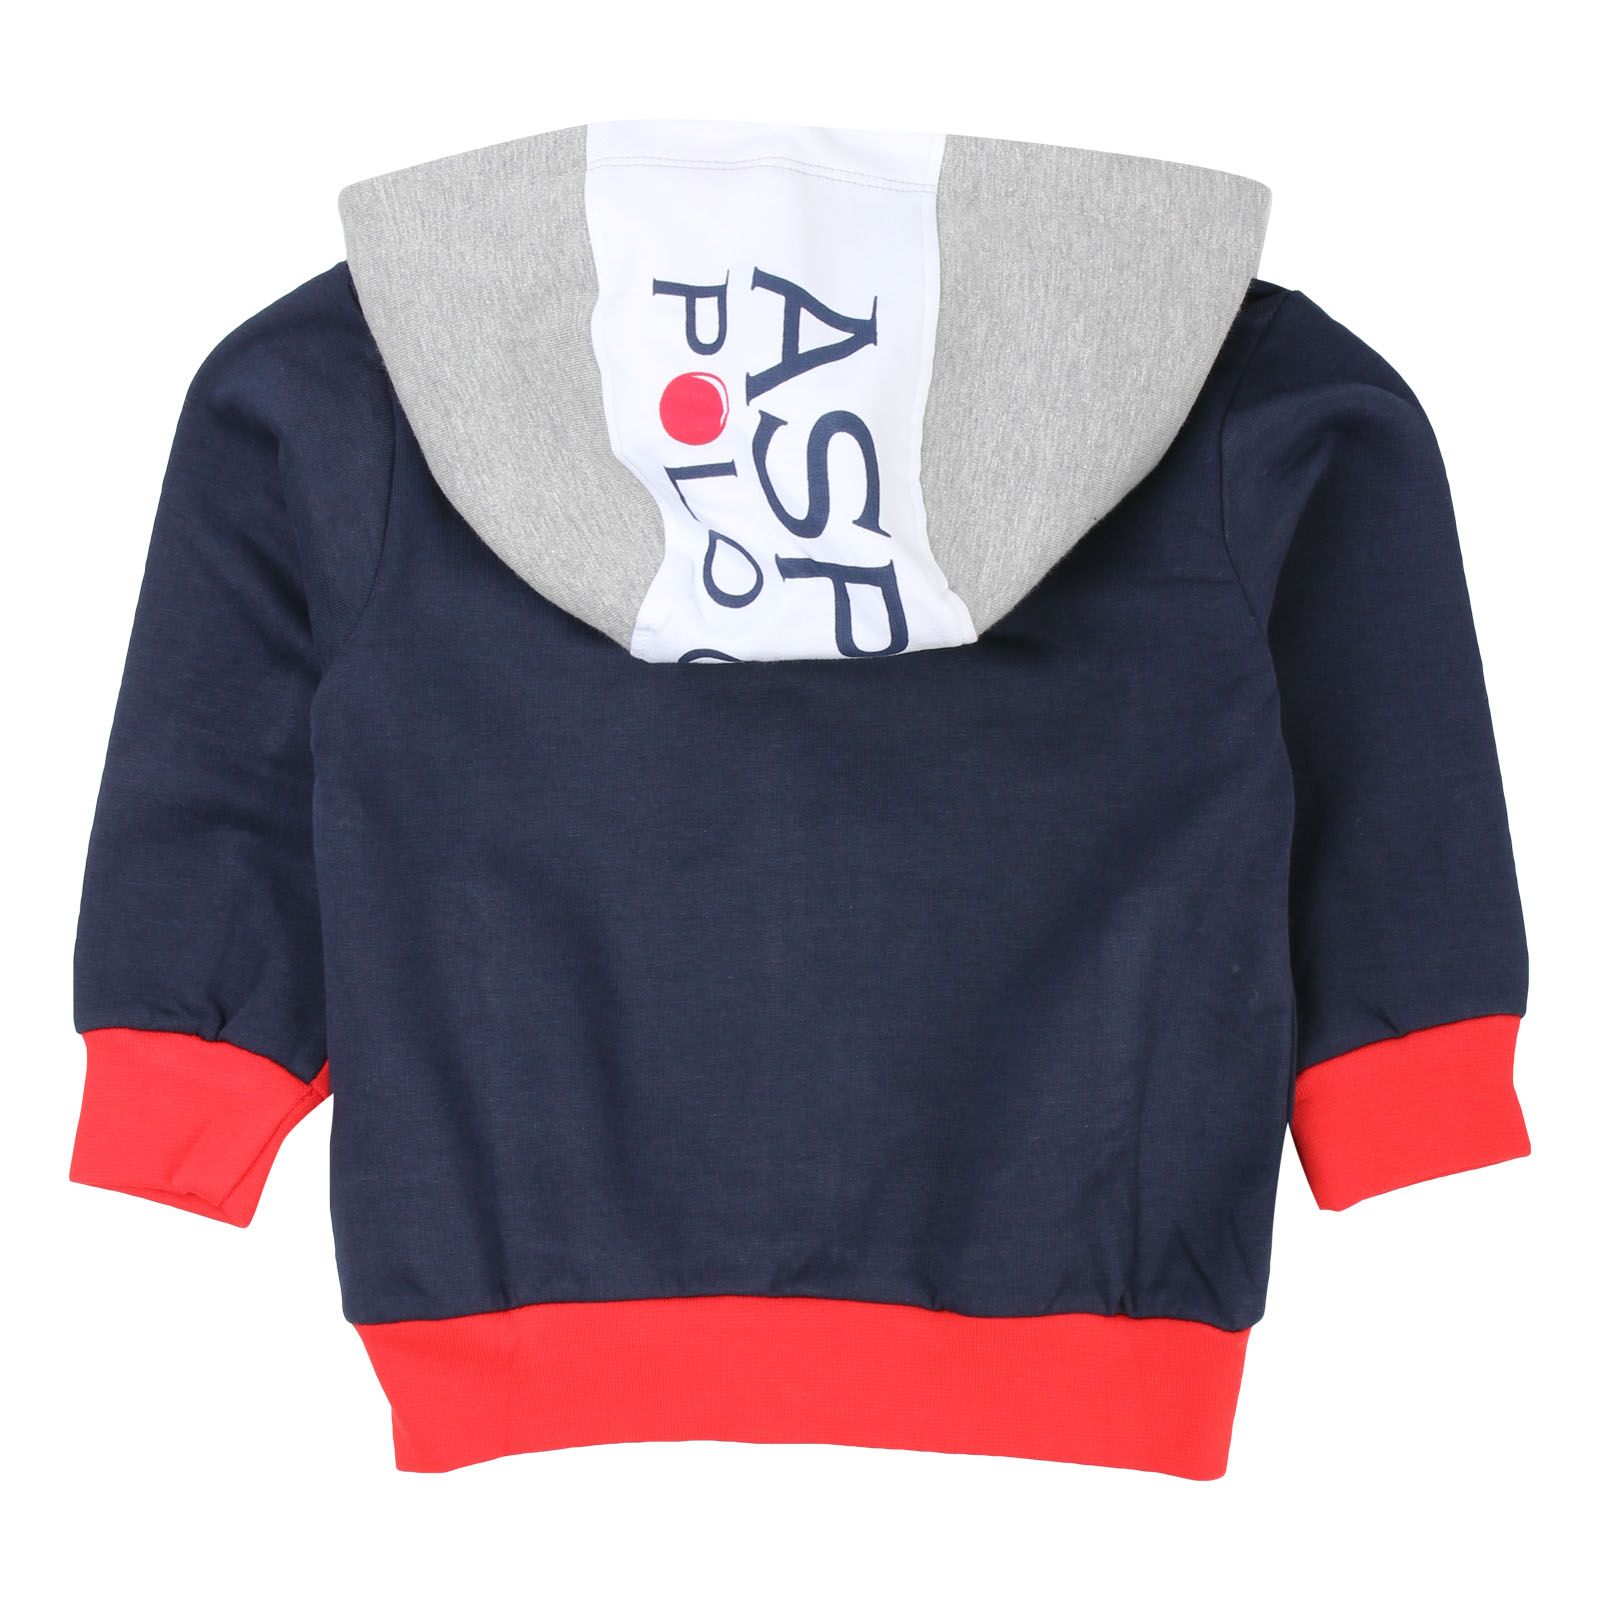 Blue Aspen polo club sweatshirt -Details sweatshirt with contrasting hood, logoed, long sleeves in tricolor, blue bottom in the center, logo on the chest, 2 pockets, red hem, central zip closure -Washing max 30 °